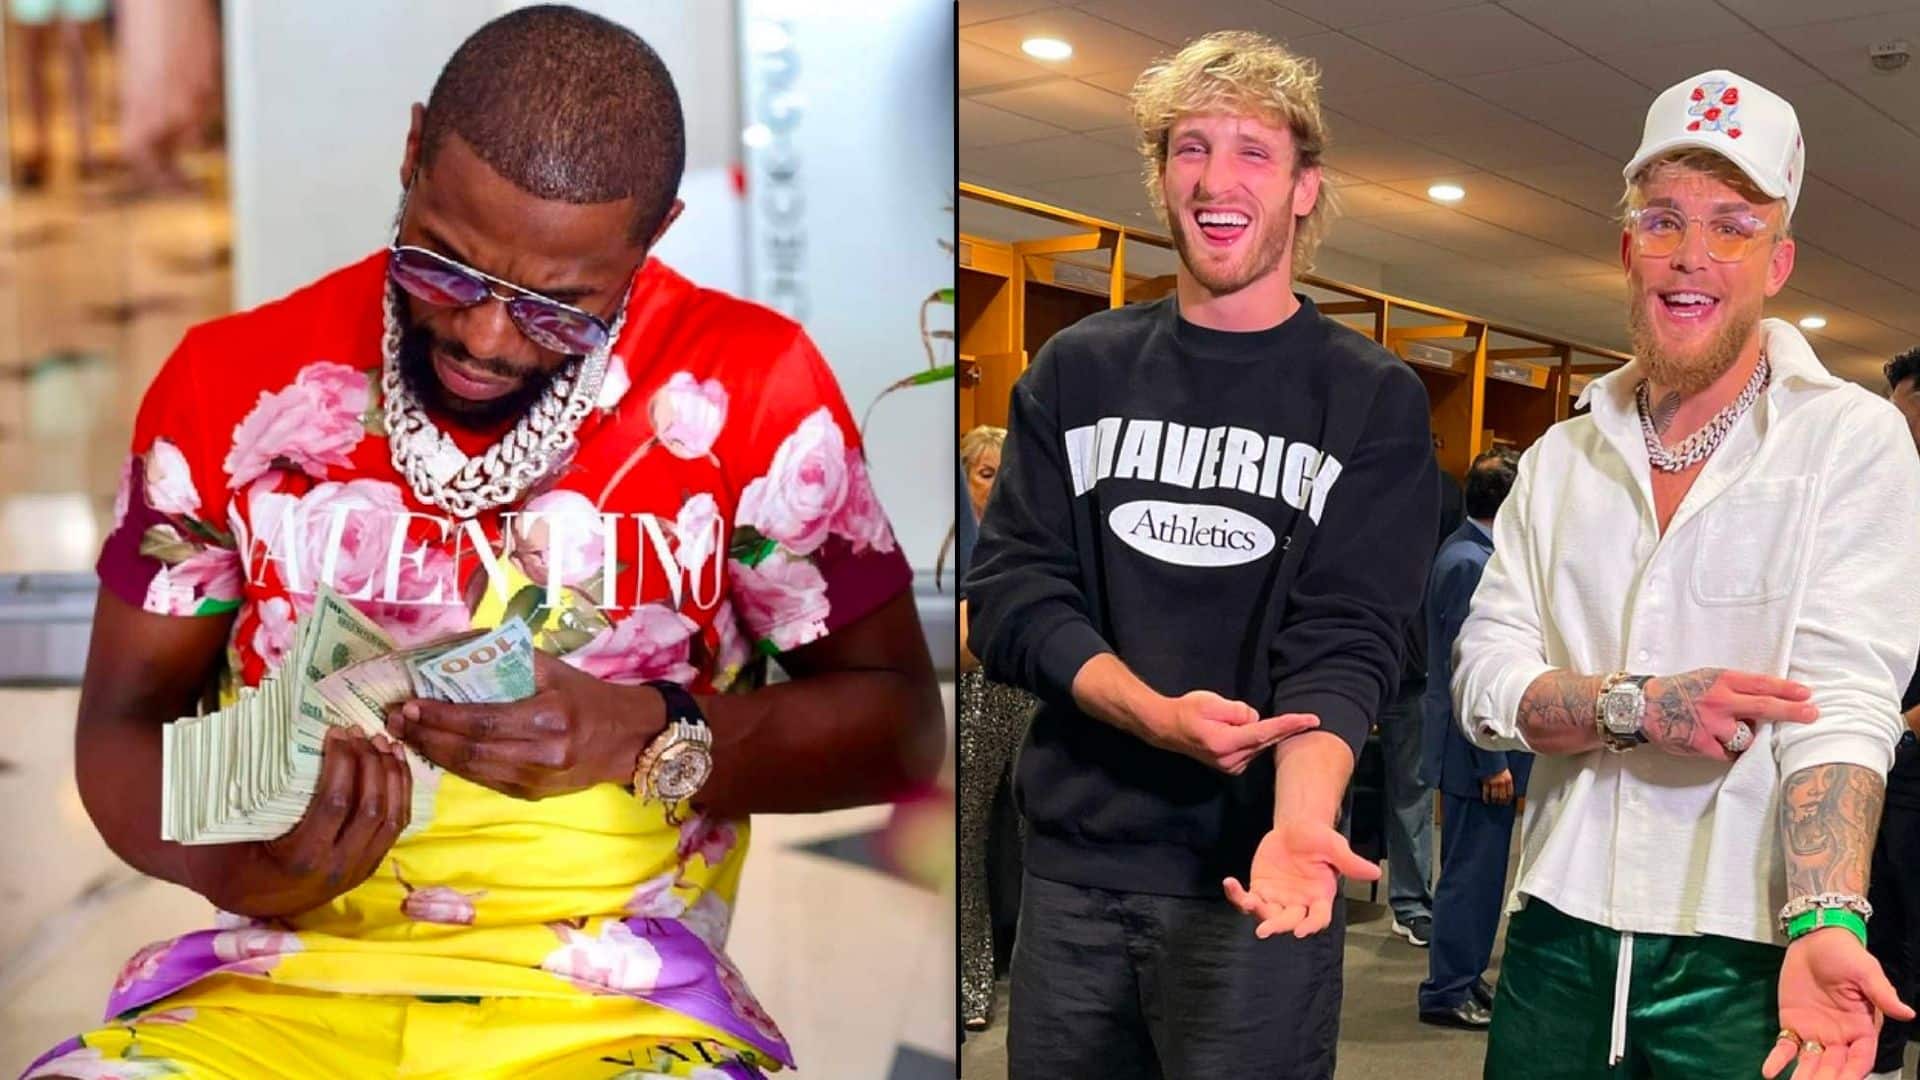 Floyd Mayweather reveals monthly income after Jake & Logan Paul